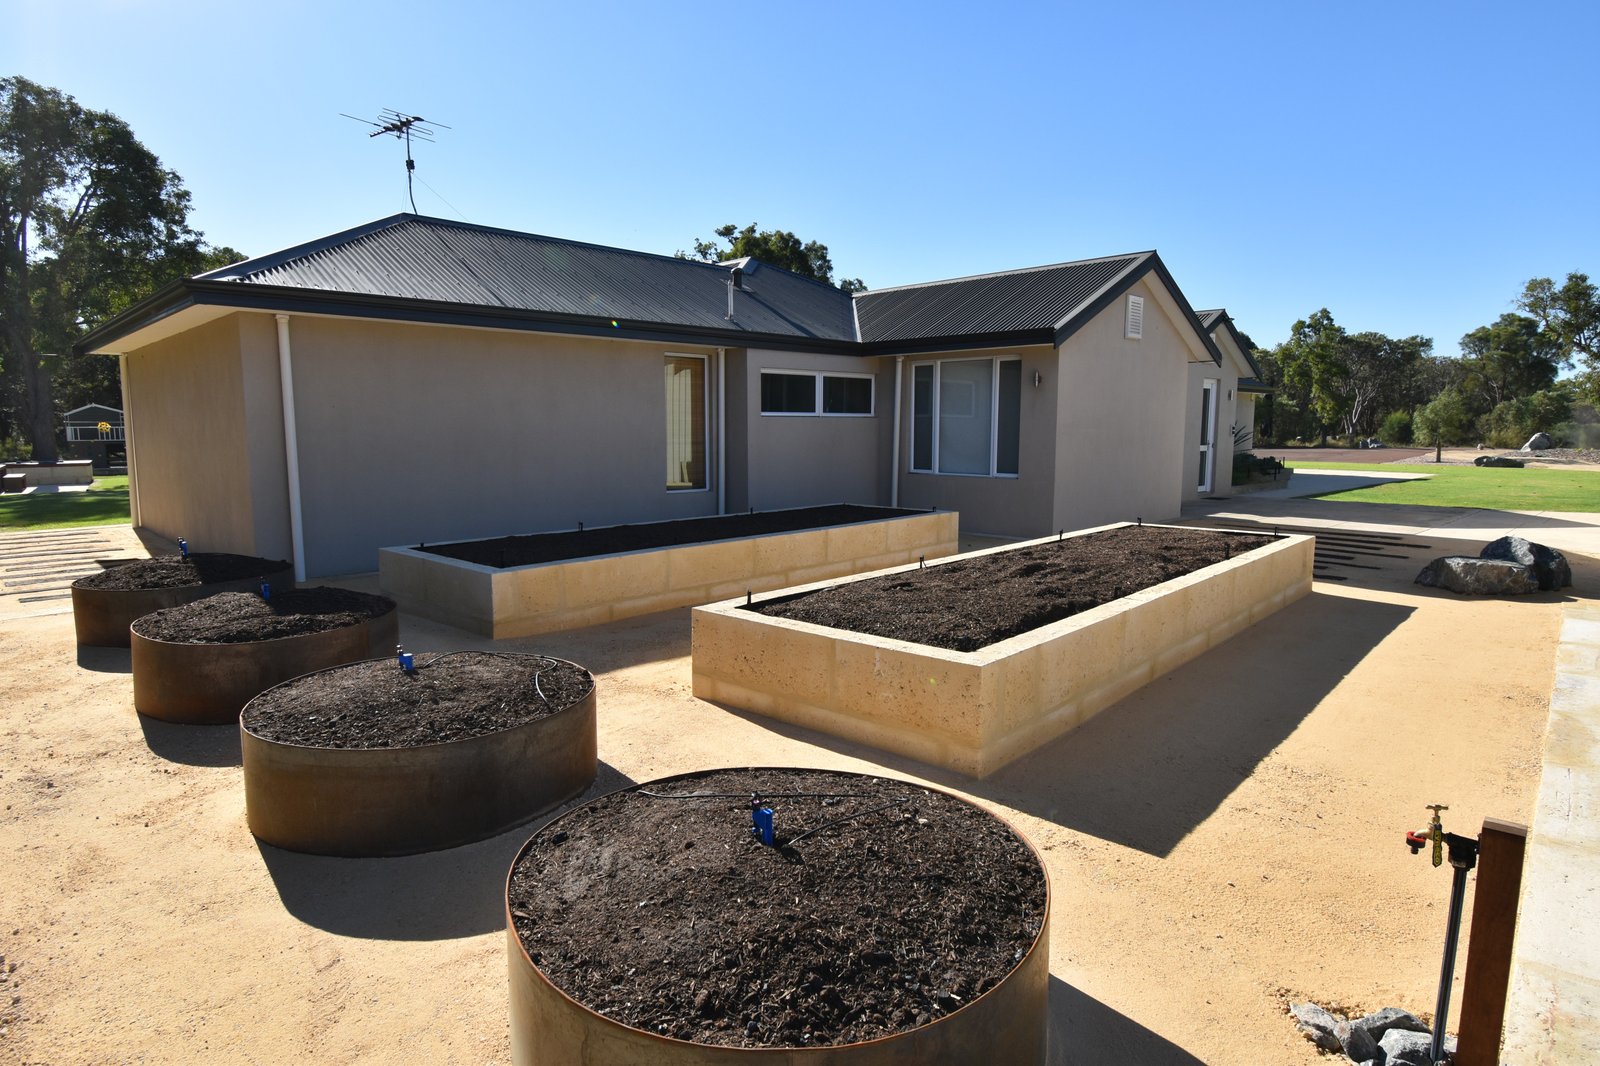 Stake Hill, Rural Landscaping Company Project, Landscaping Perth